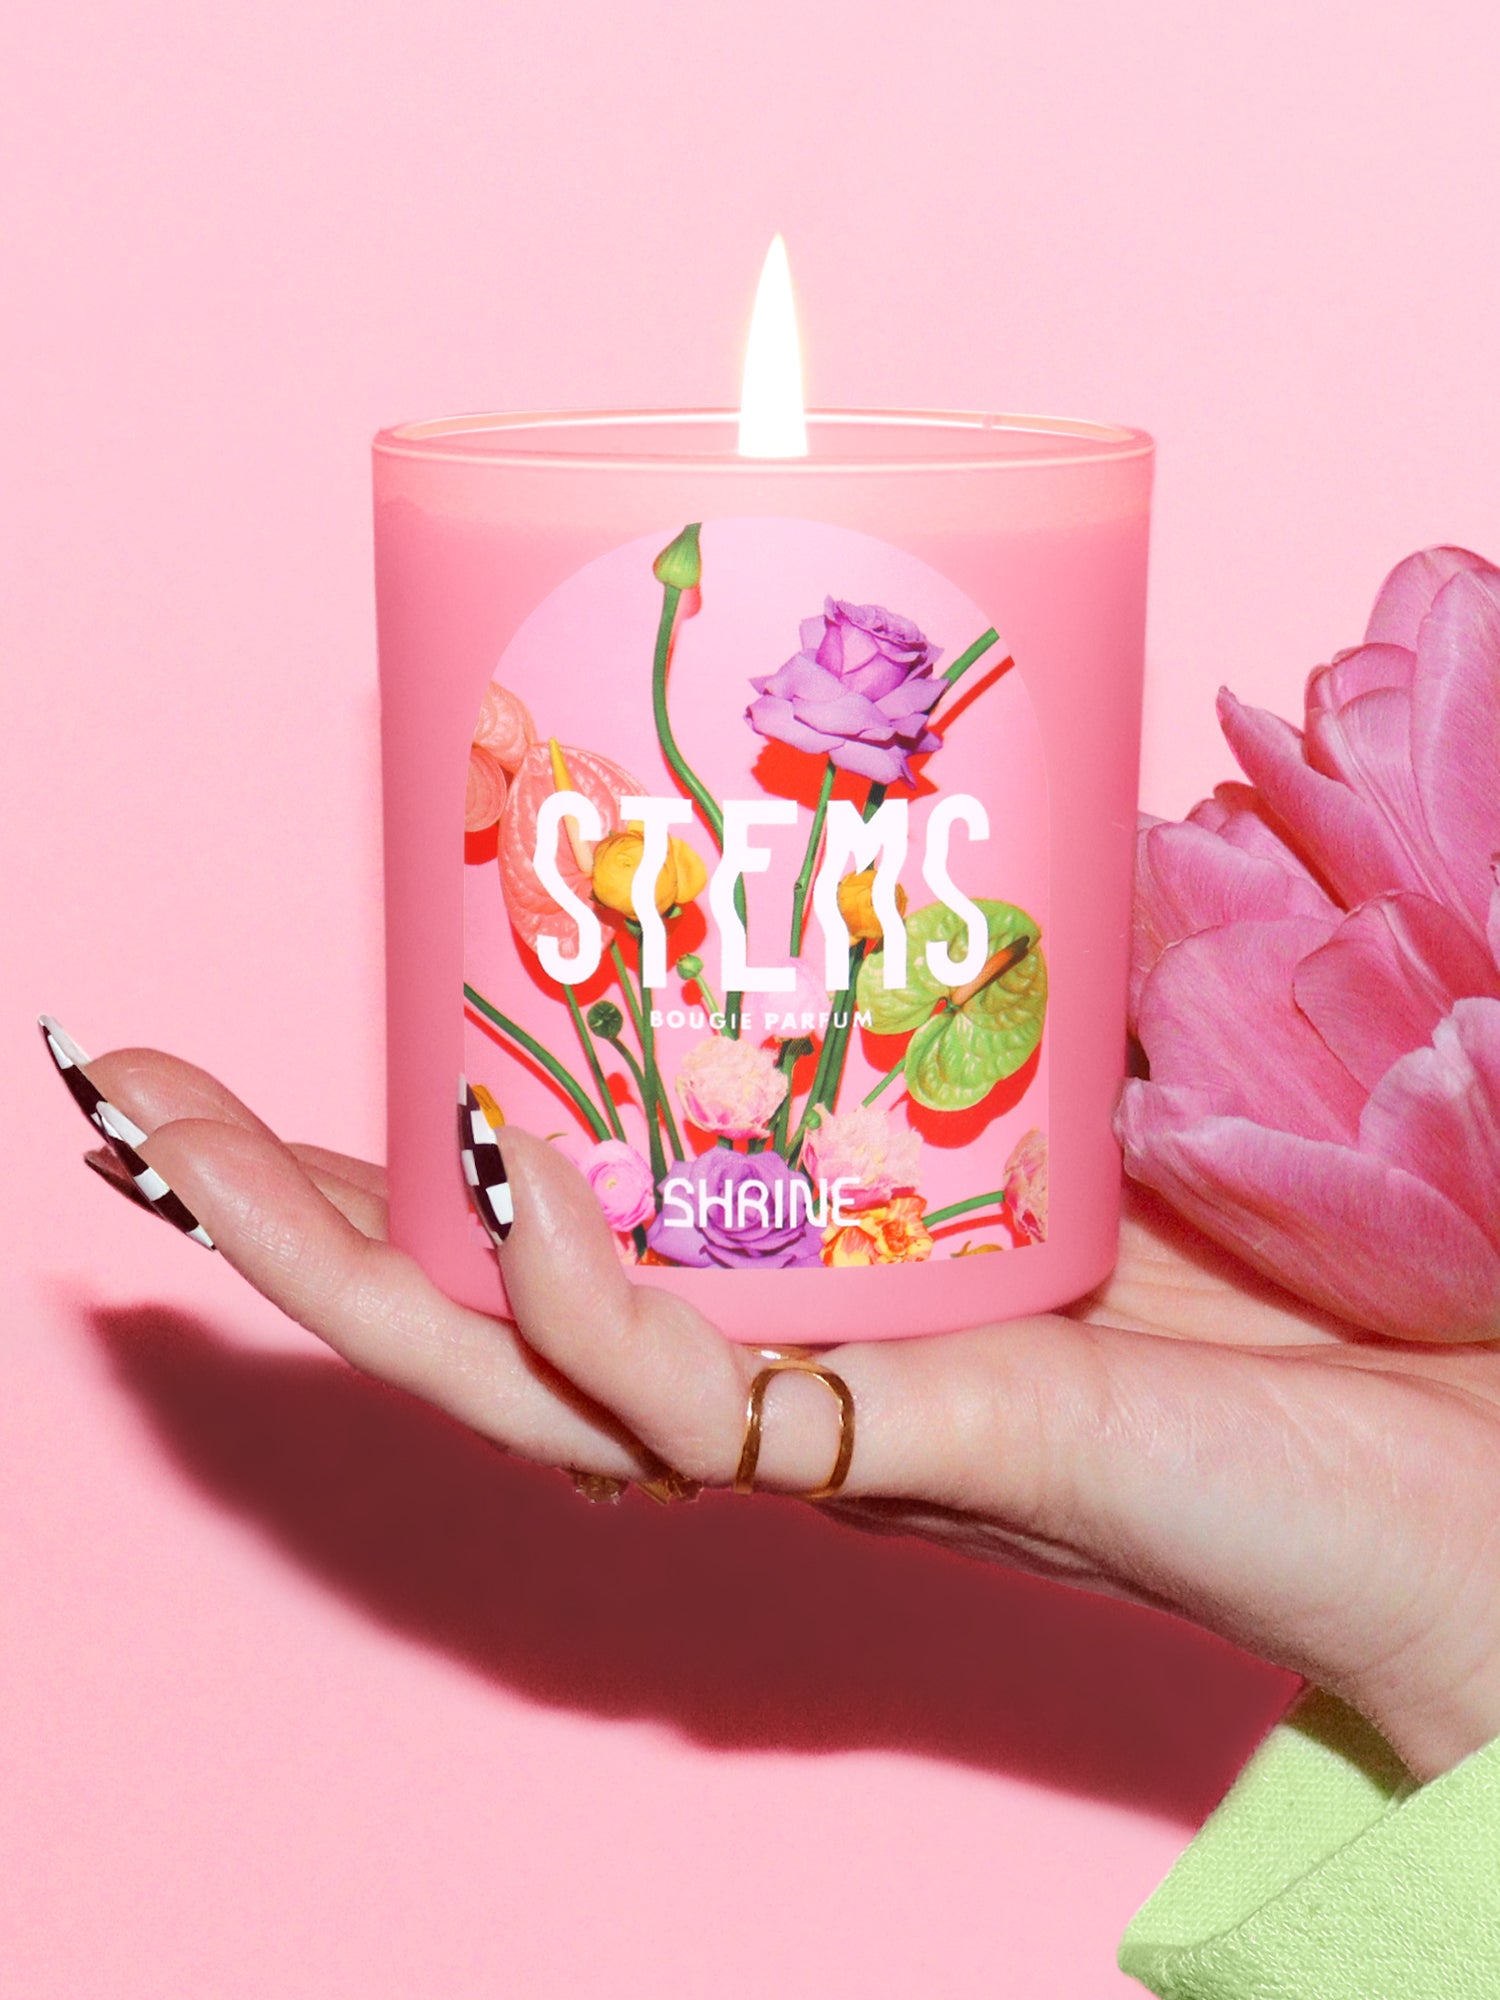 shrine stems pink floral flower candle with black and white checkered nail hands shop shrine shopshrine